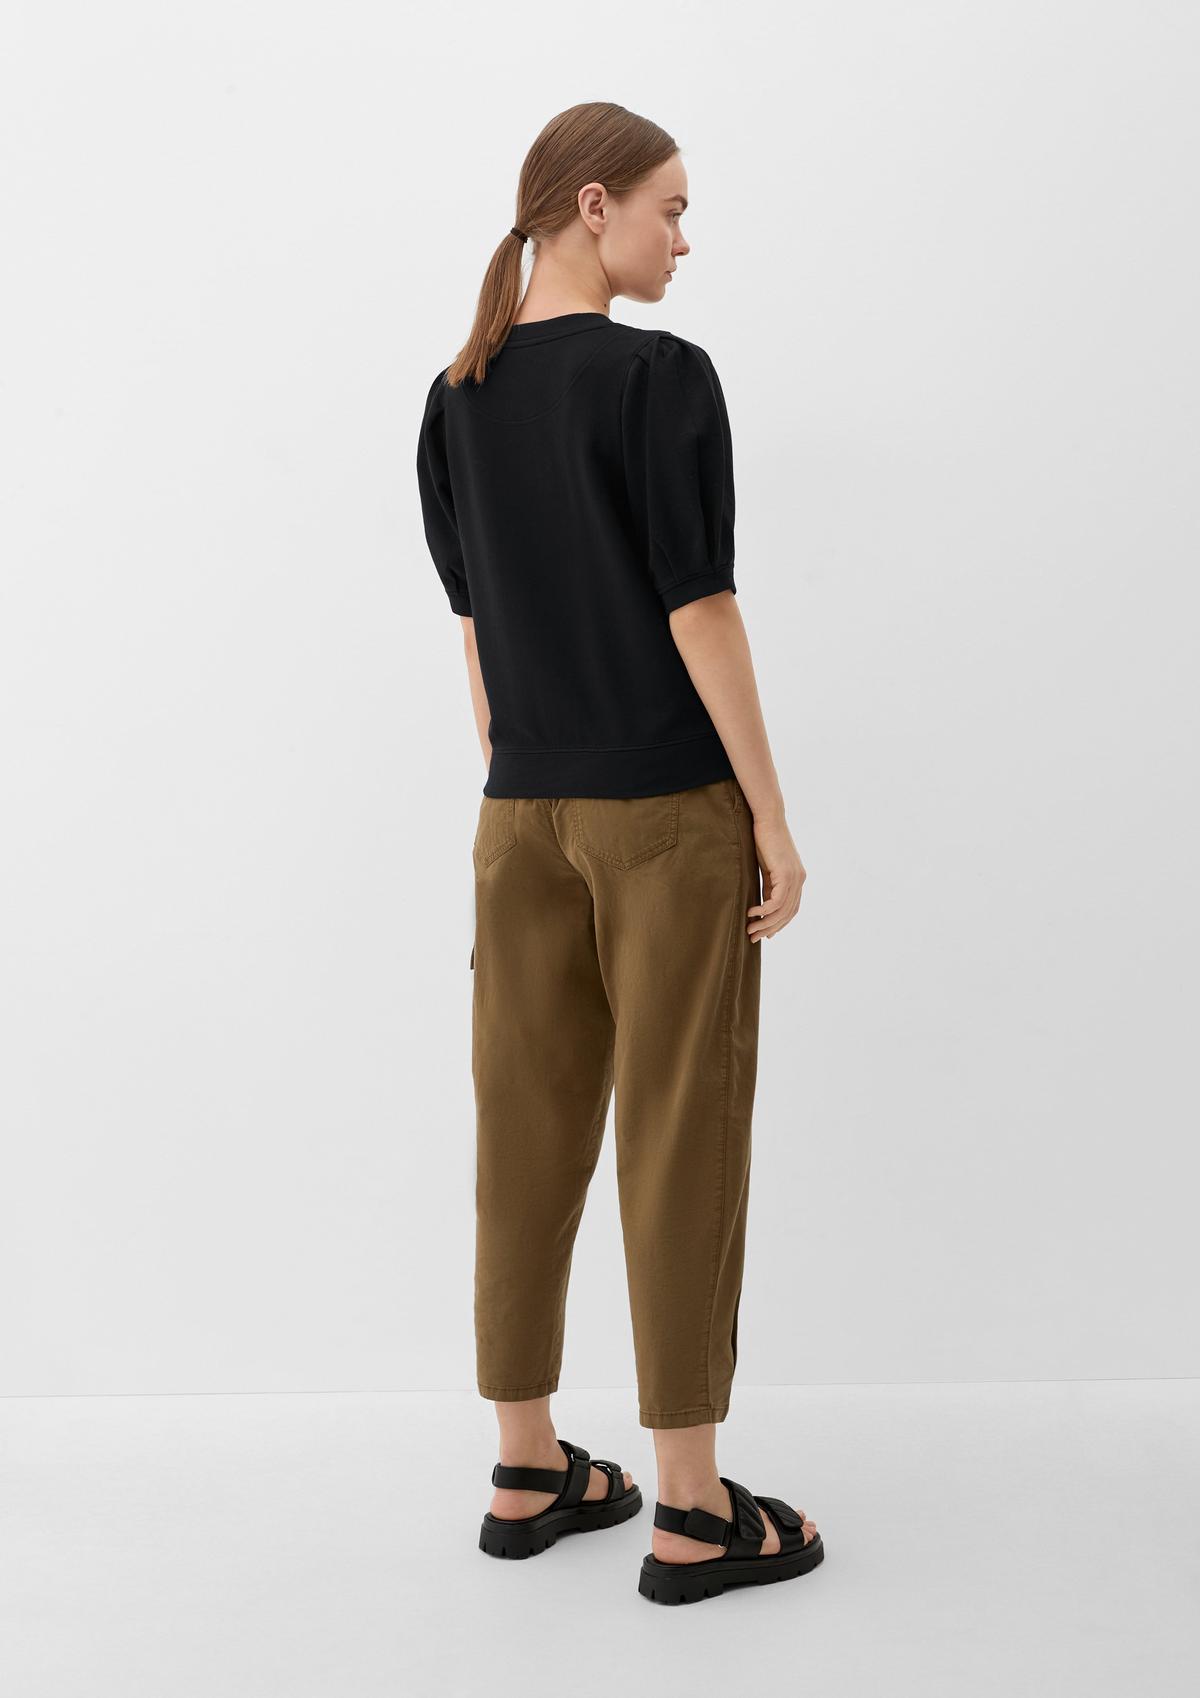 s.Oliver Sweatshirt with mid-length sleeves